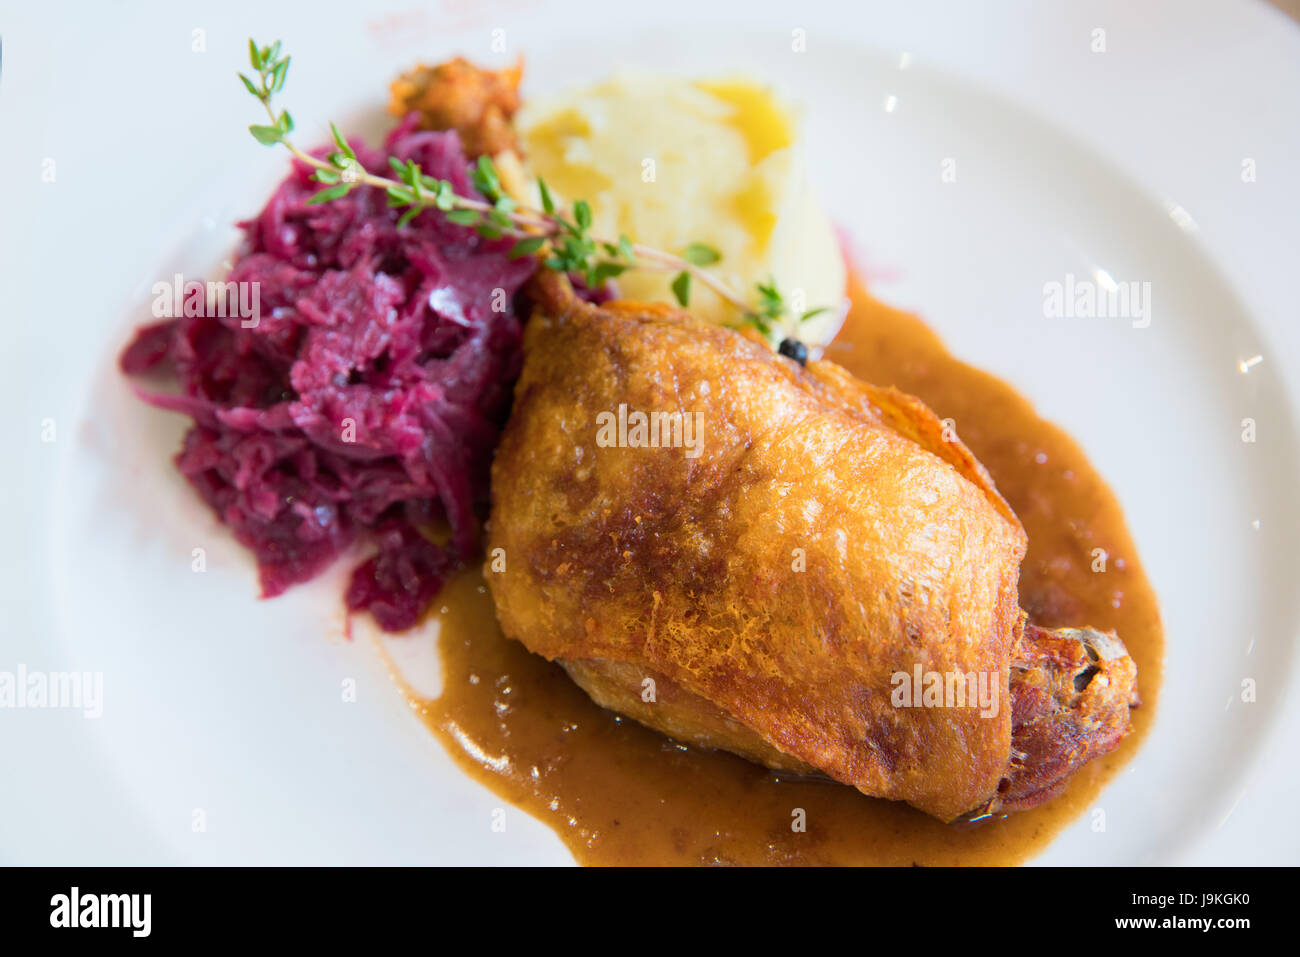 Duck confit with purple cabbage and mashed potato on white plate Stock Photo